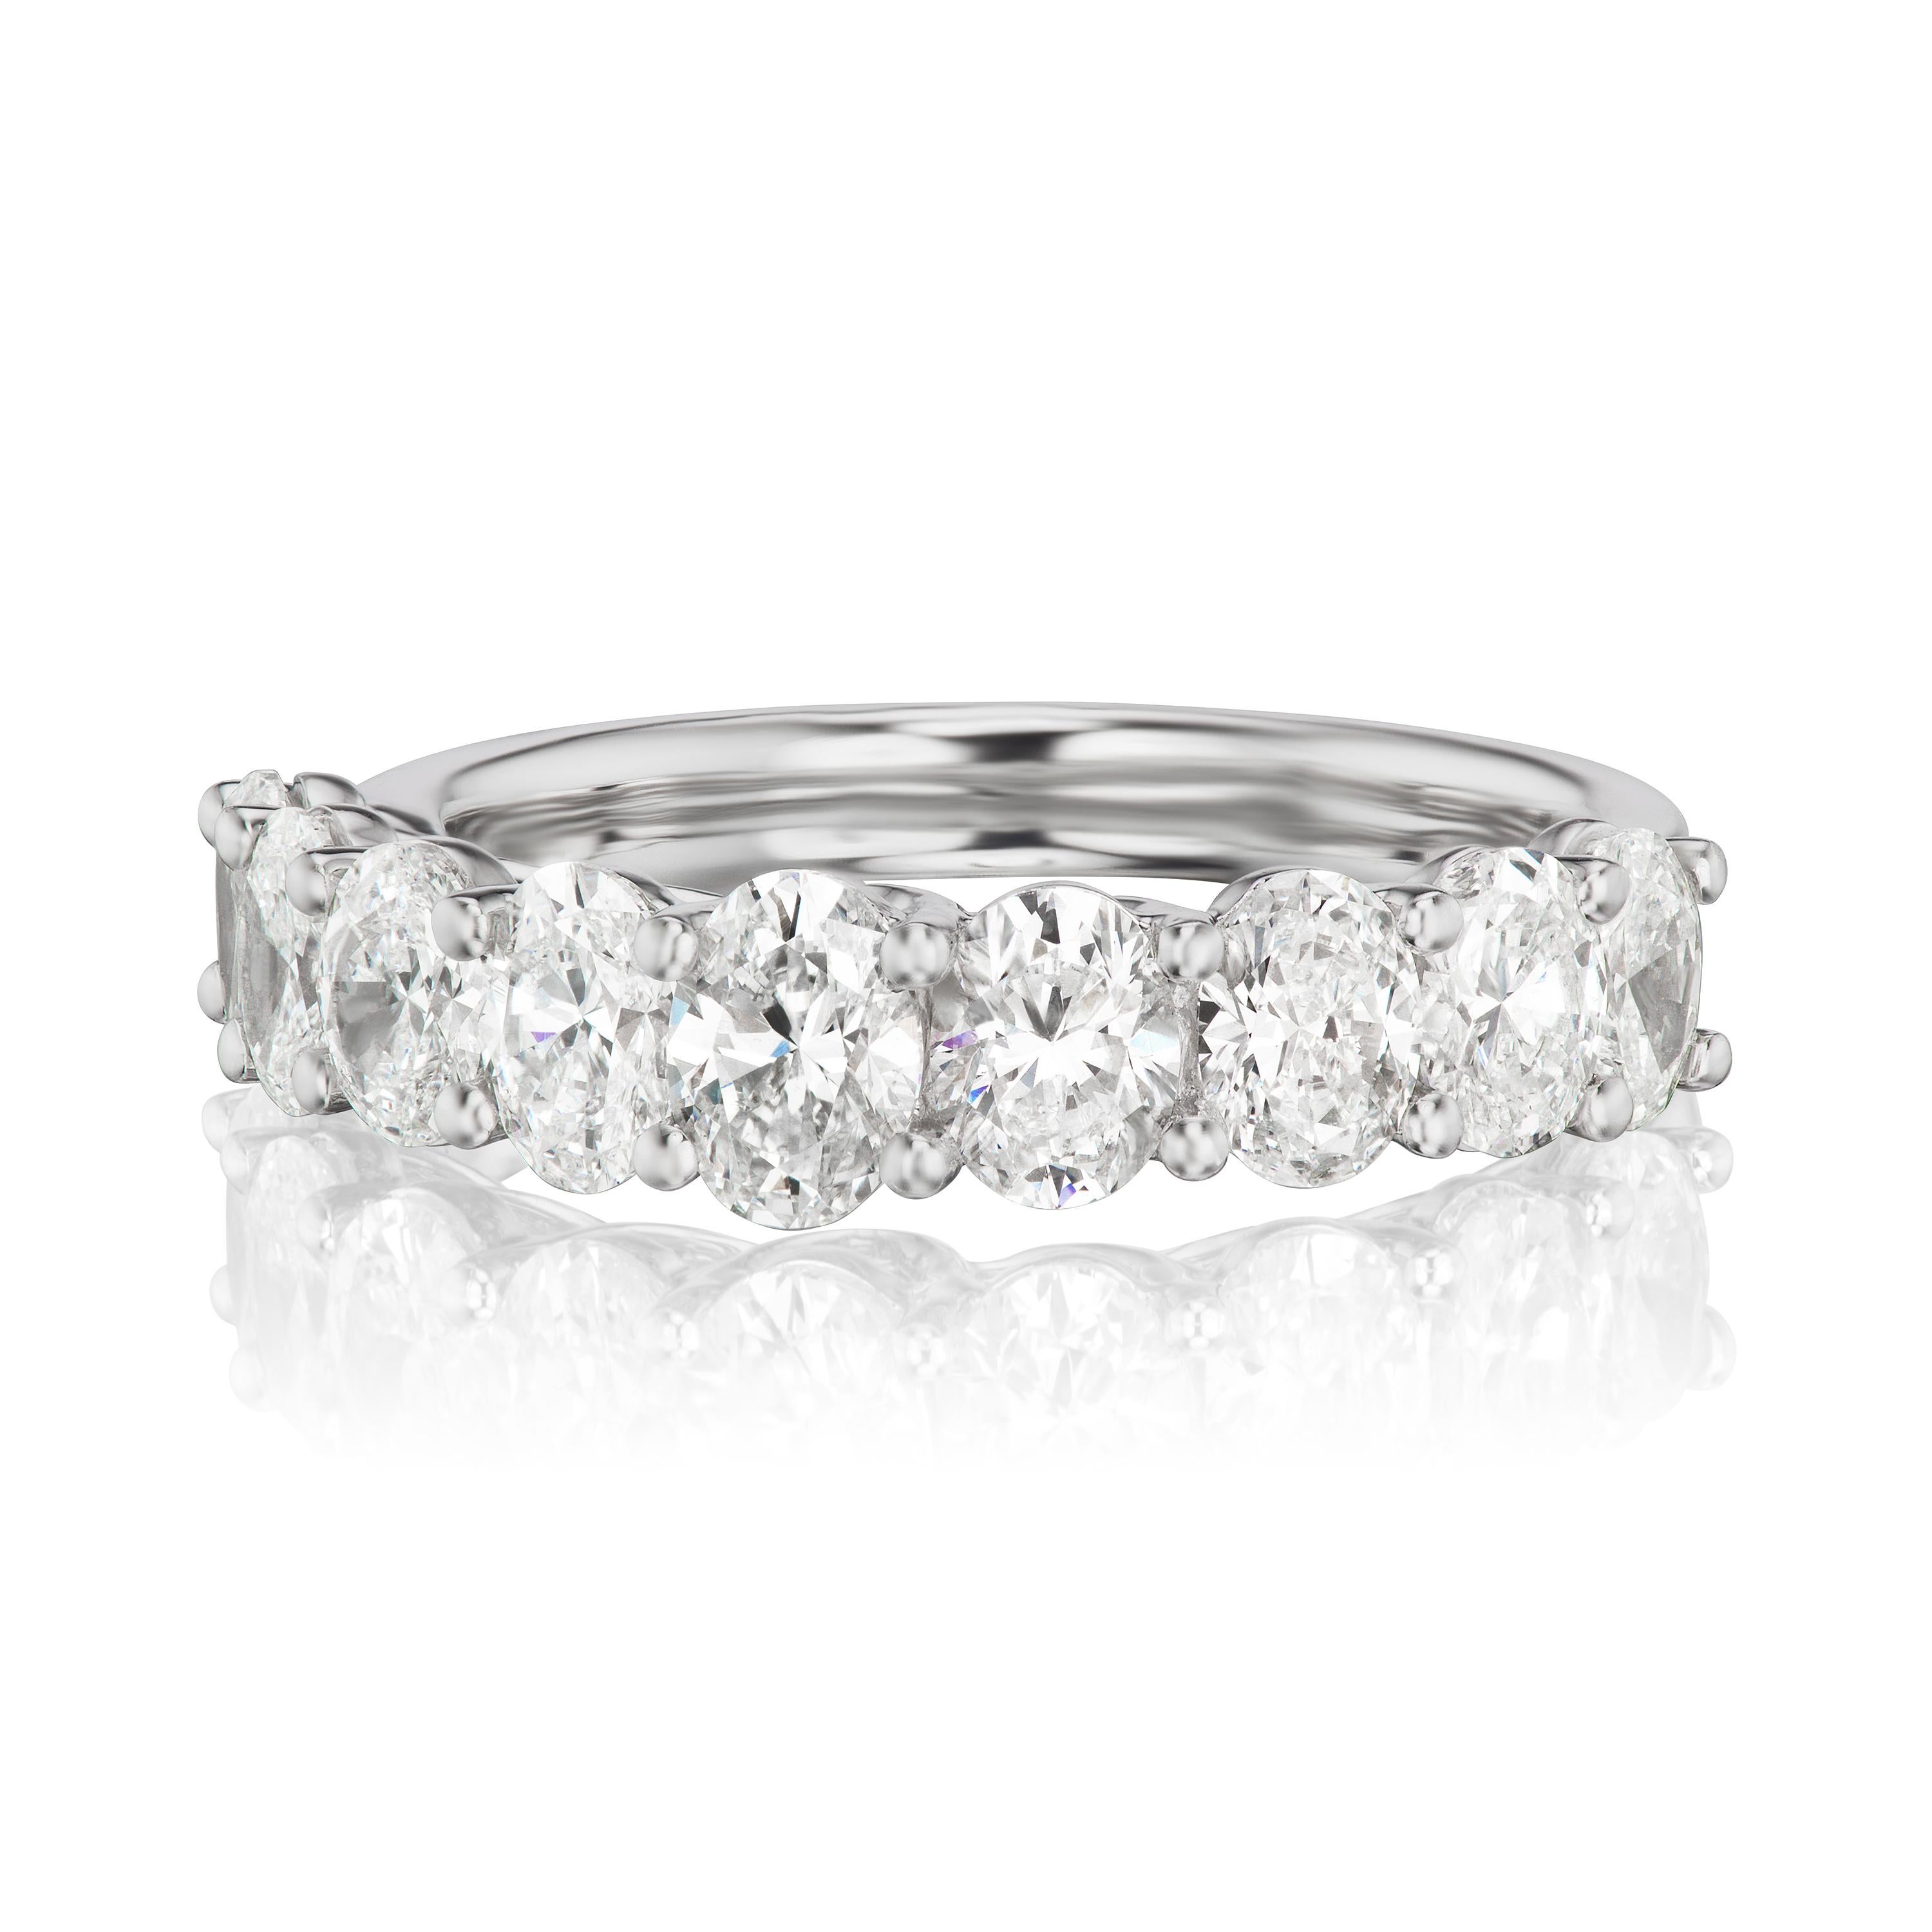 This 18k white gold eternity diamond ring is studded with dazzling oval shaped full cut 0.83 Cts diamonds. The stock size of the ring is US 7. The total weight of the ring is 5.69 gms. The ring can be resized with a delivery time of 3 weeks
JEWELRY